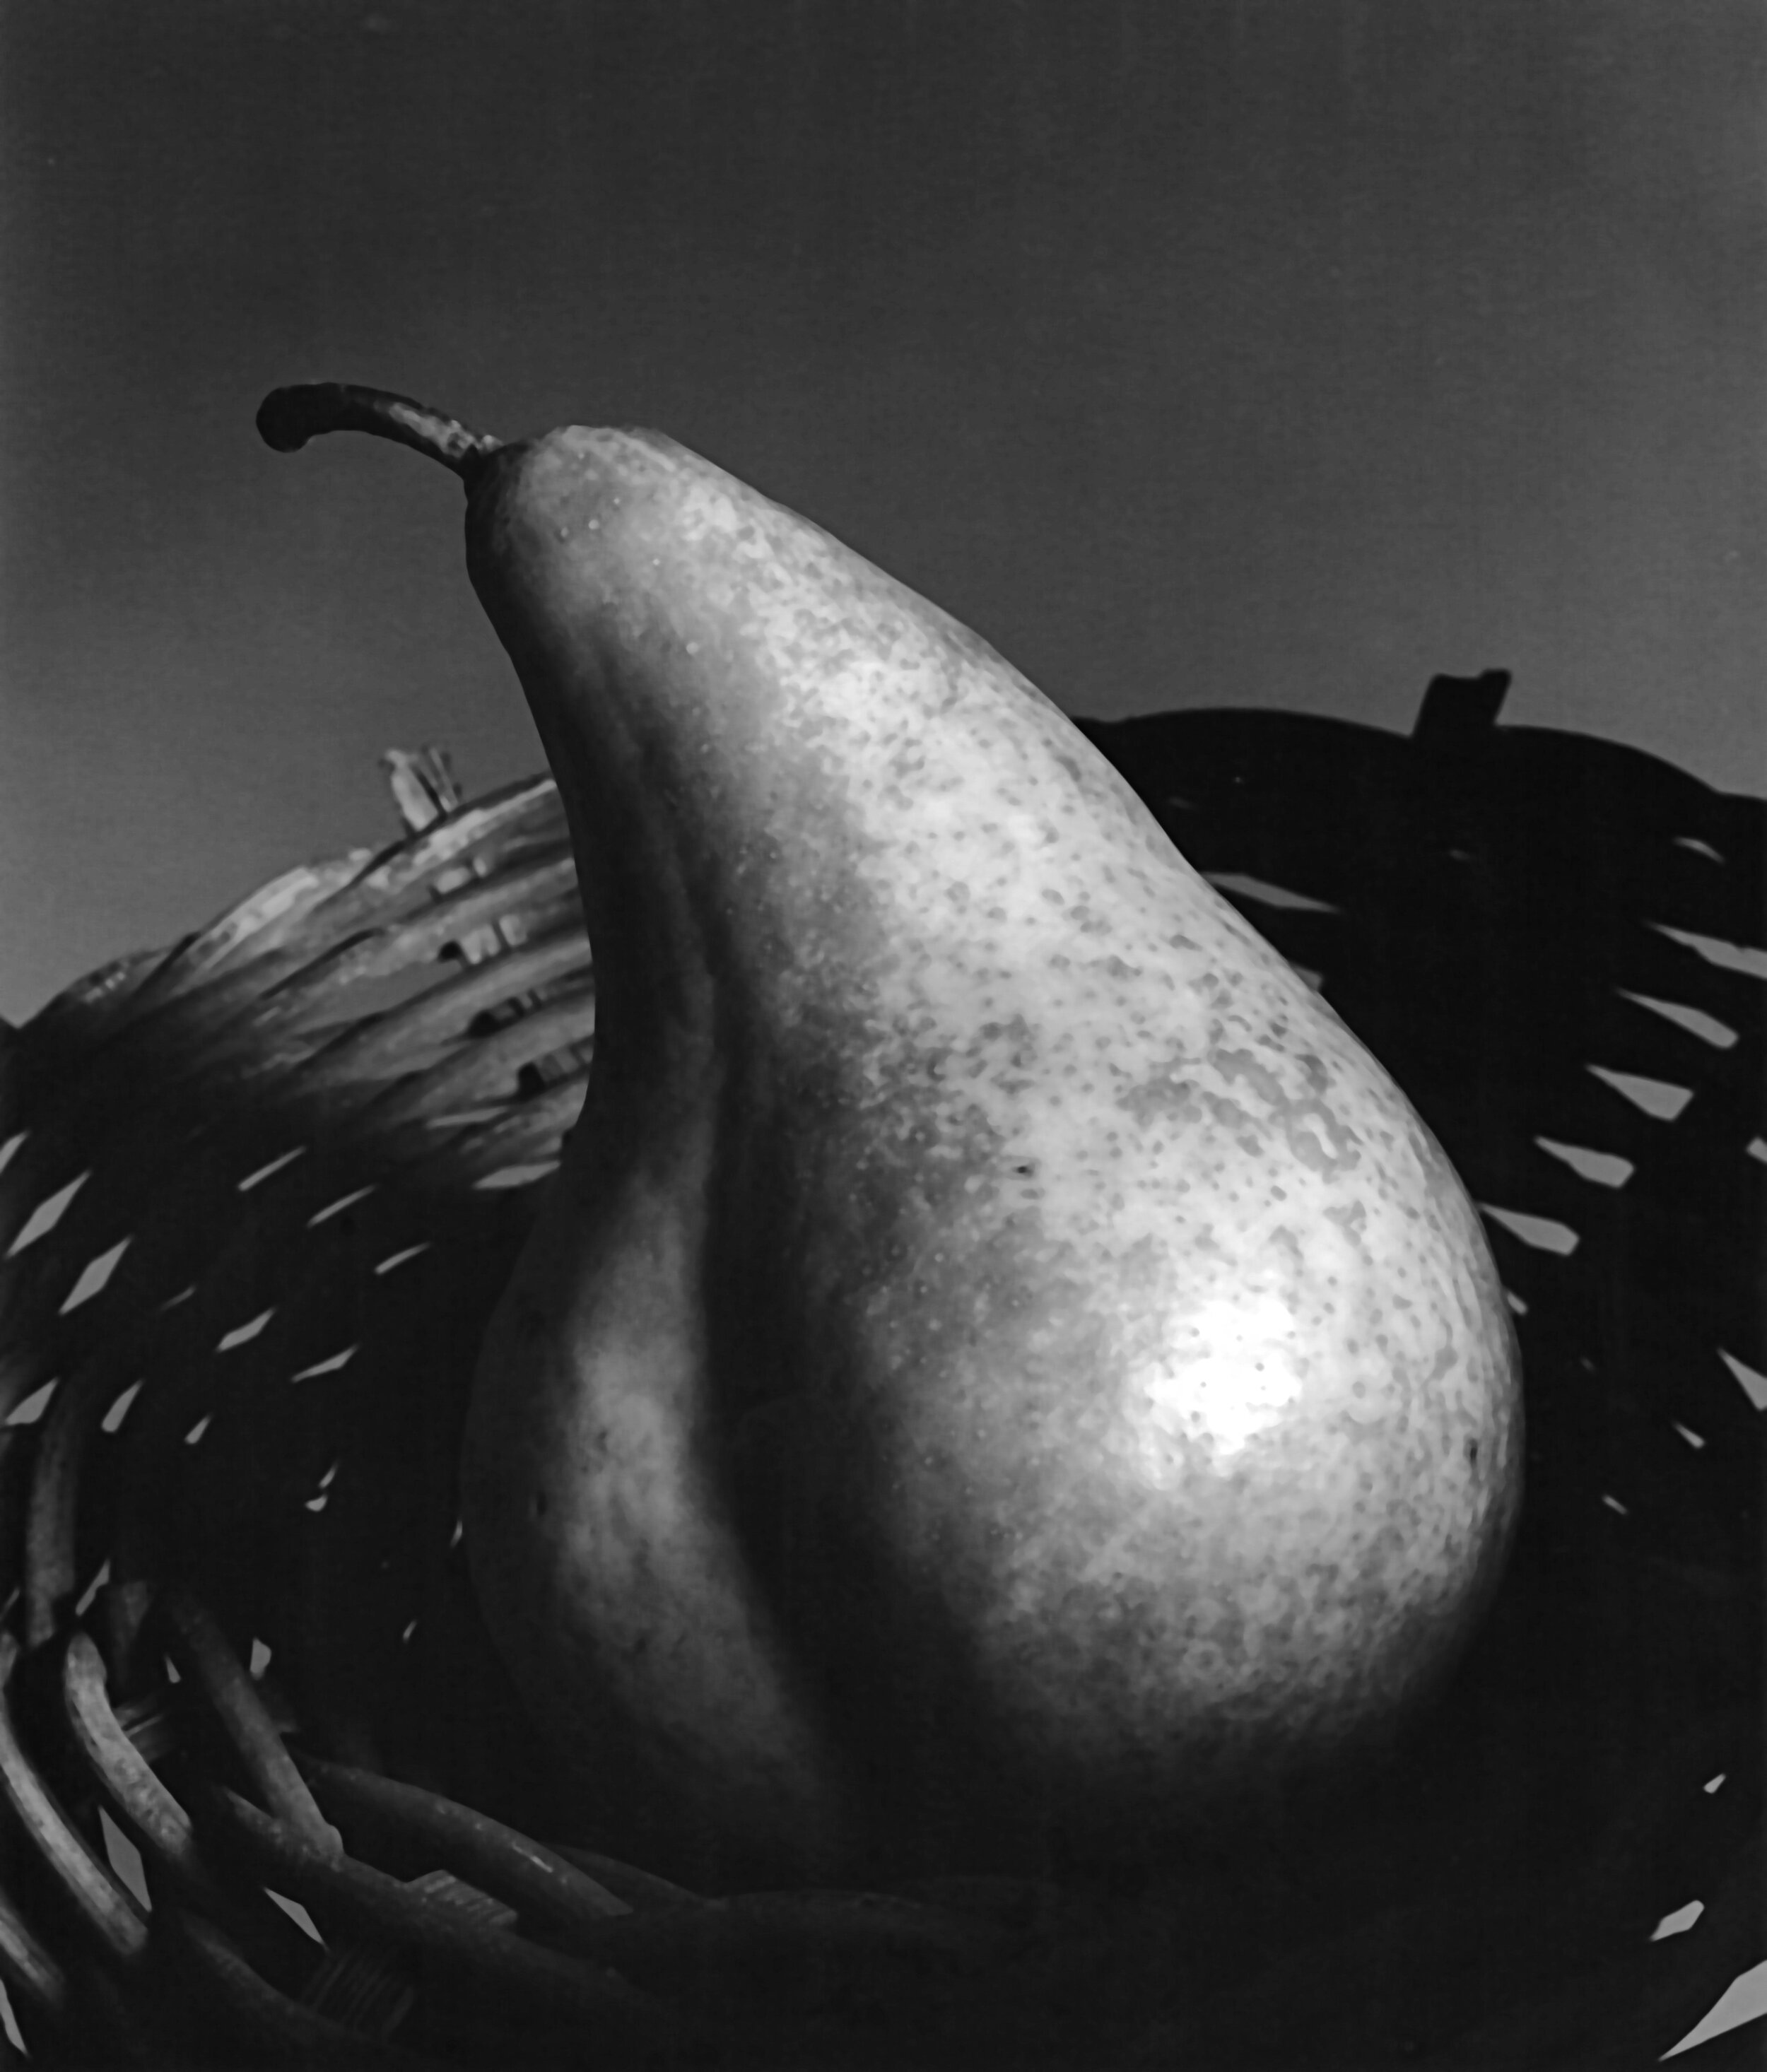 Pear Still Life (date unknown)